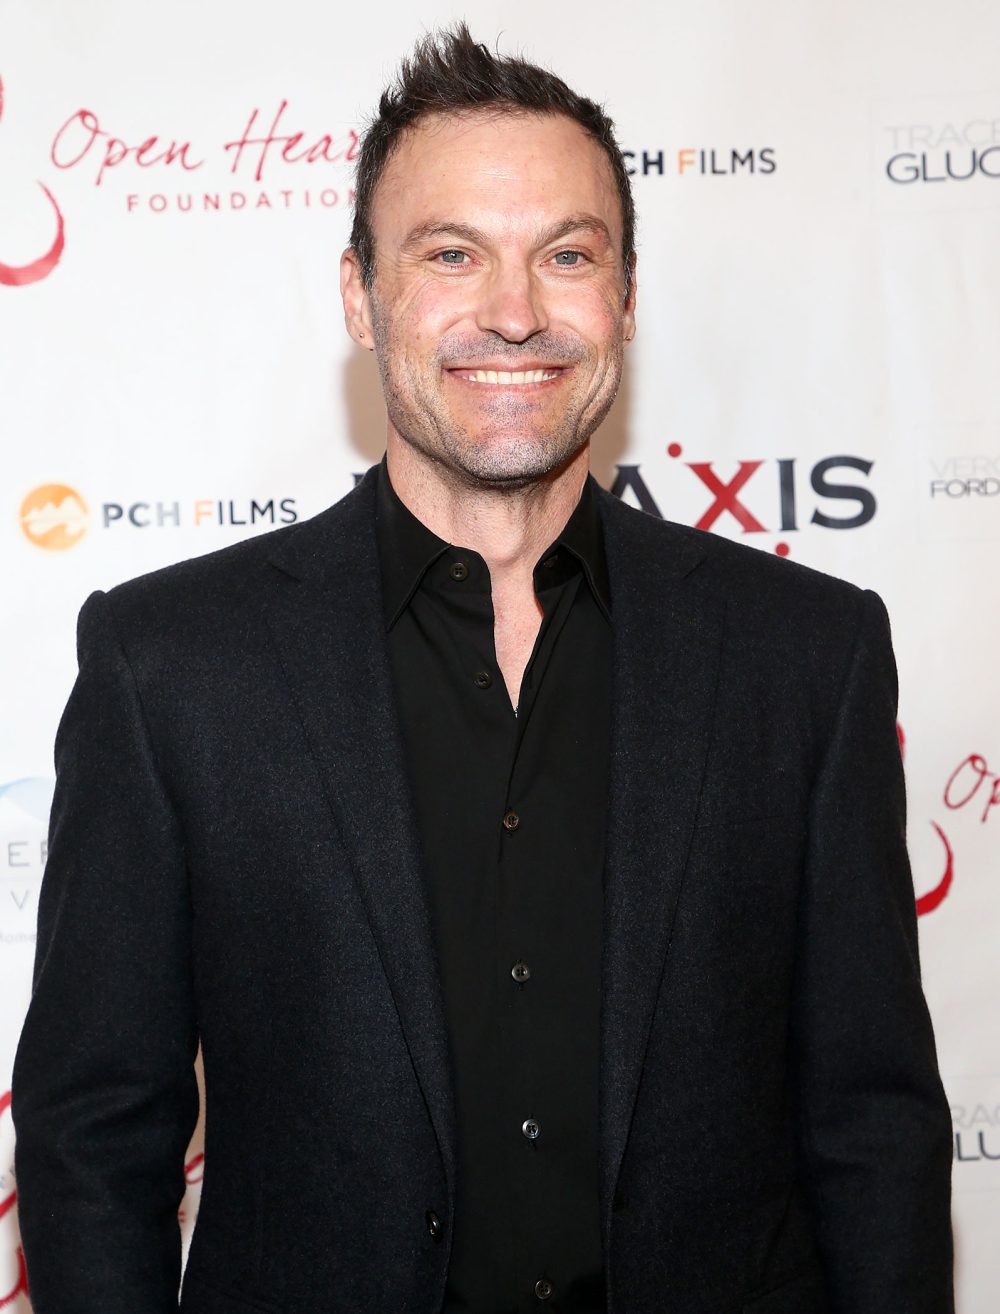 Brian Austin Green Shares Rare Photo With All 4 Children for Father's Day